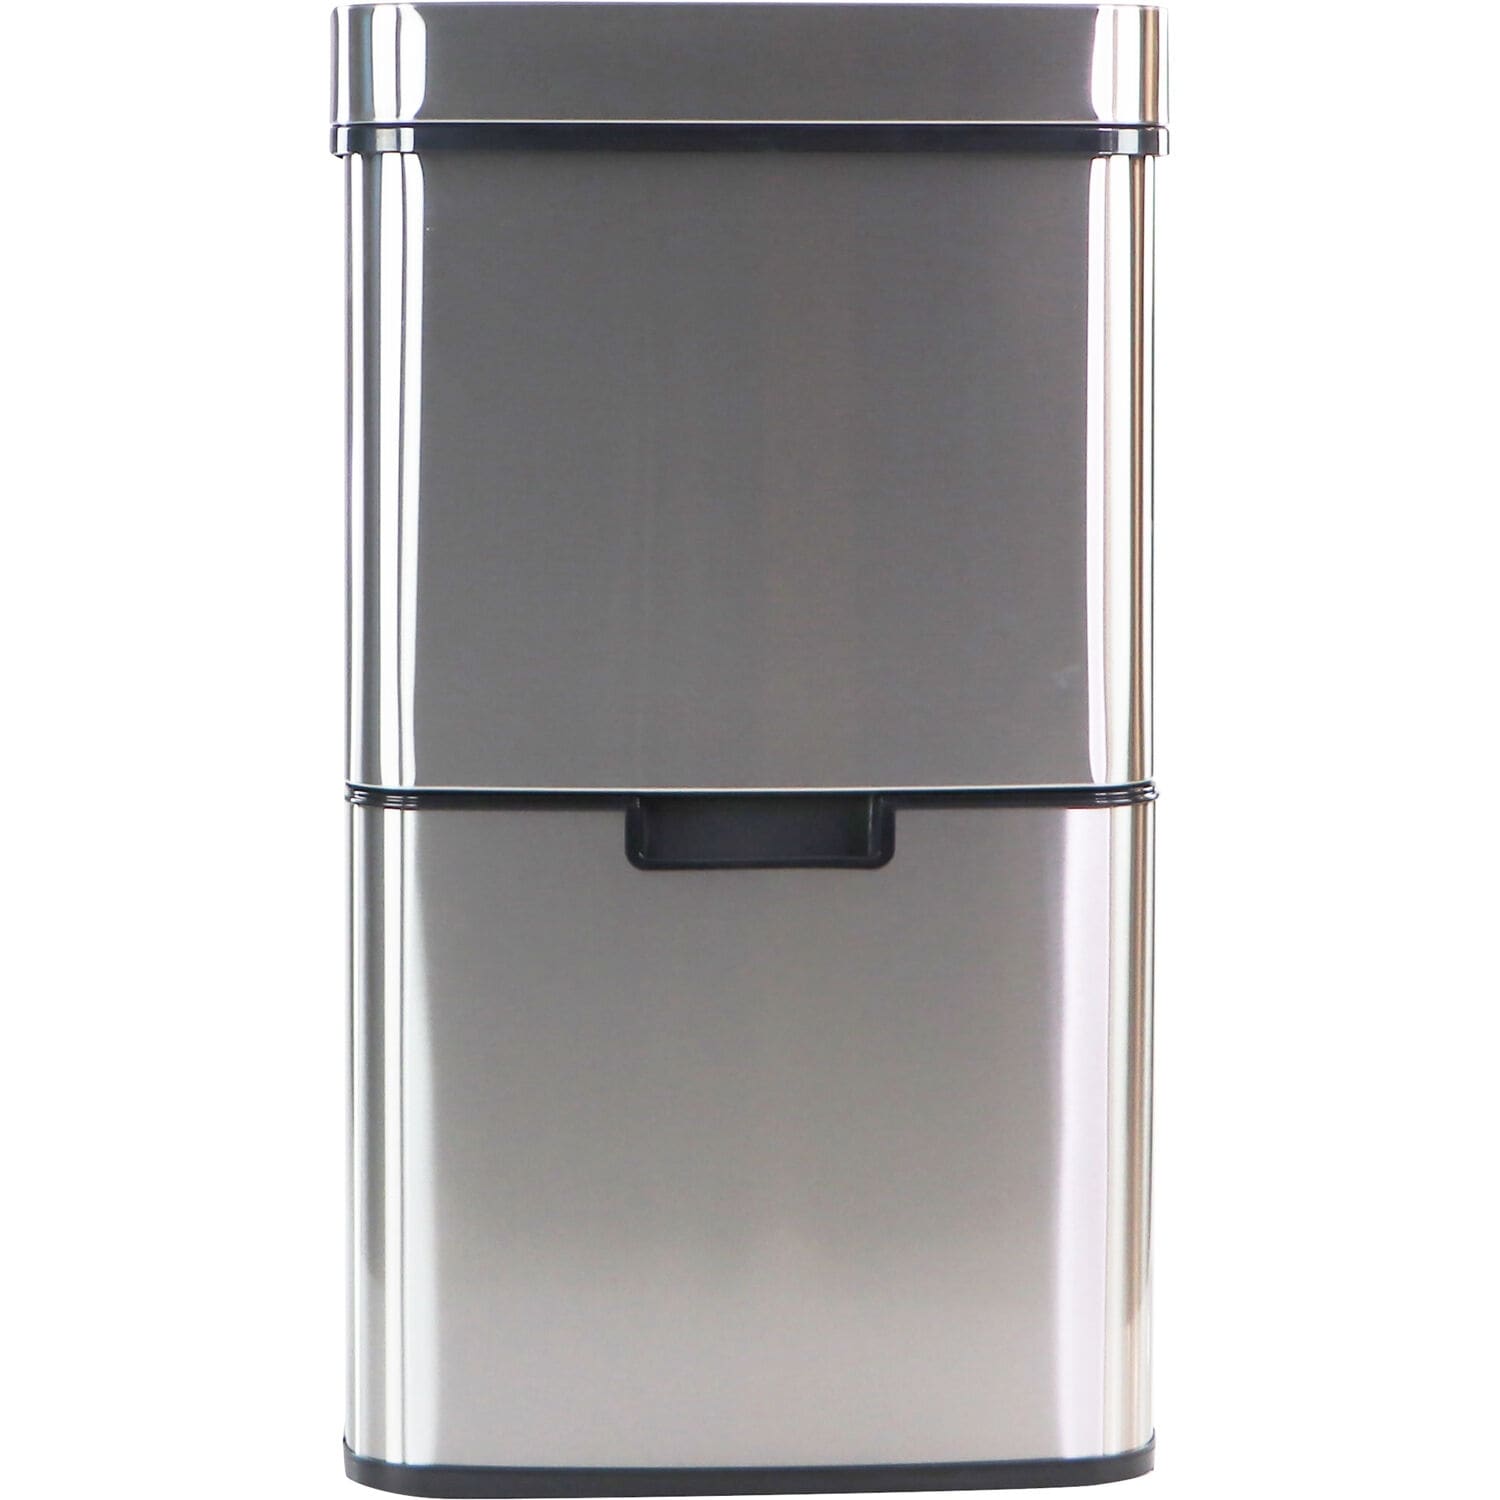 https://ak1.ostkcdn.com/images/products/is/images/direct/17c2b491ce993ad82f10e70b6c7da3630cbe5aae/Hanover-62-Liter---16.4-Gallon-Trash-Can-with-Dual-Bins-and-Sensor-Lid-in-Stainless-Steel.jpg